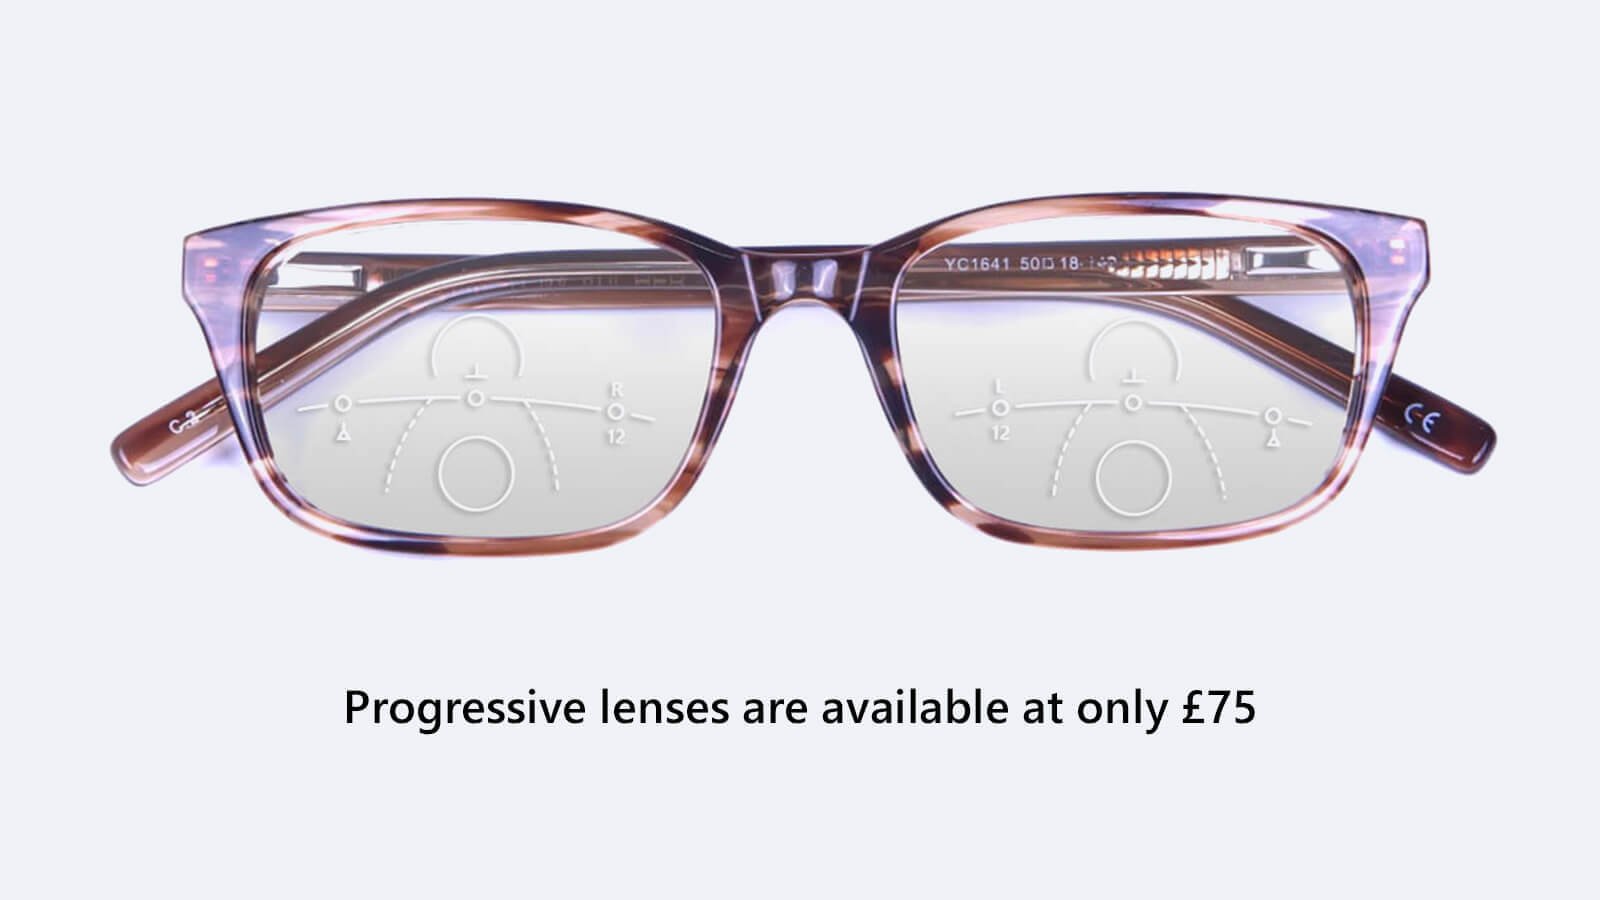 Varifocal glasses at competitive prices